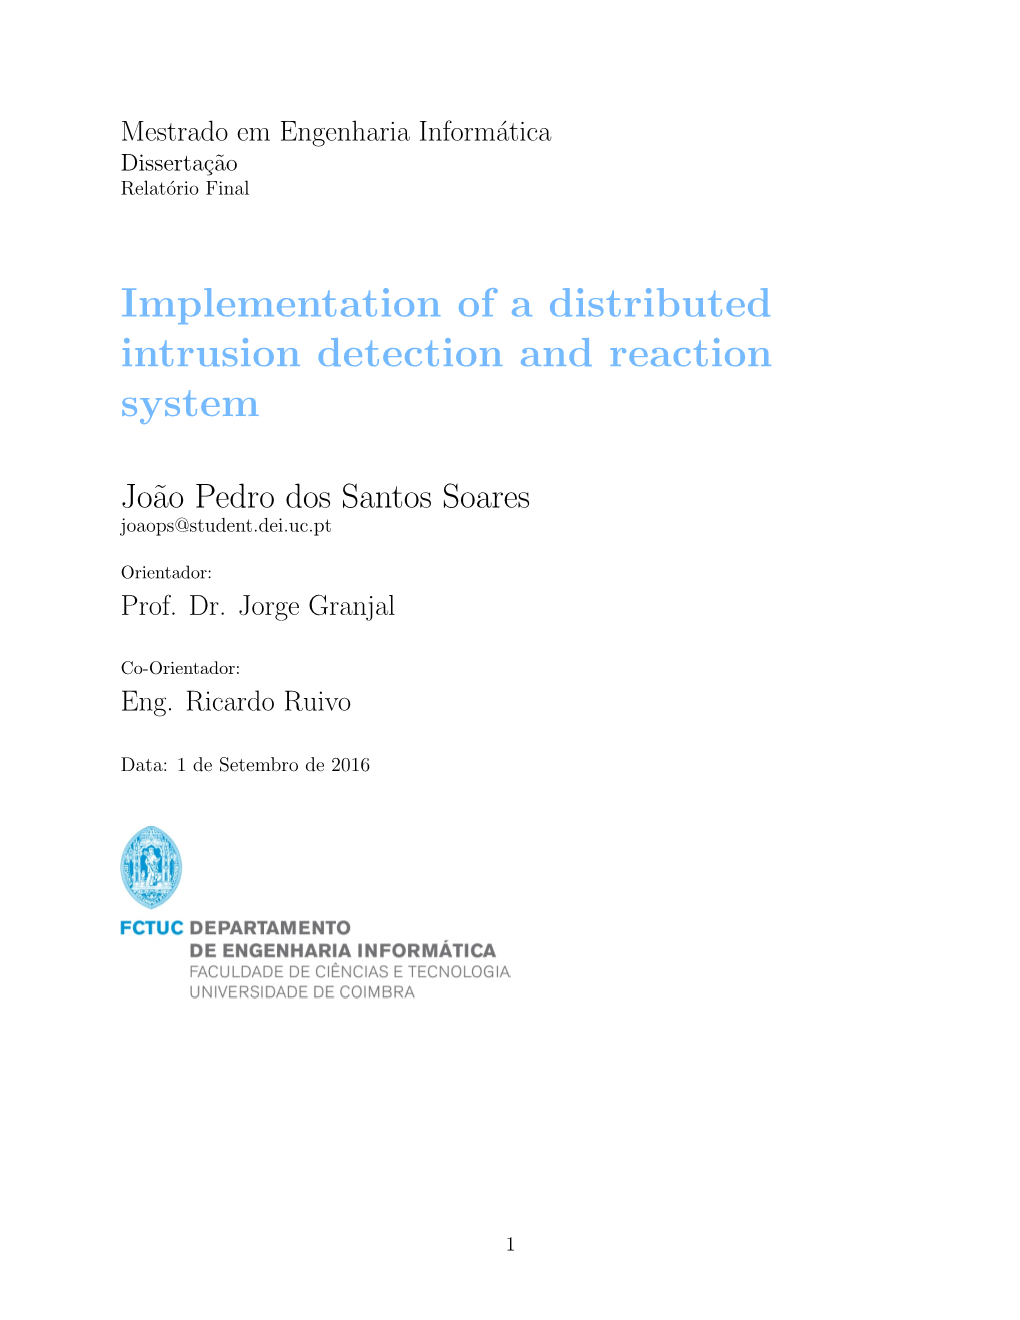 Implementation of a Distributed Intrusion Detection and Reaction System